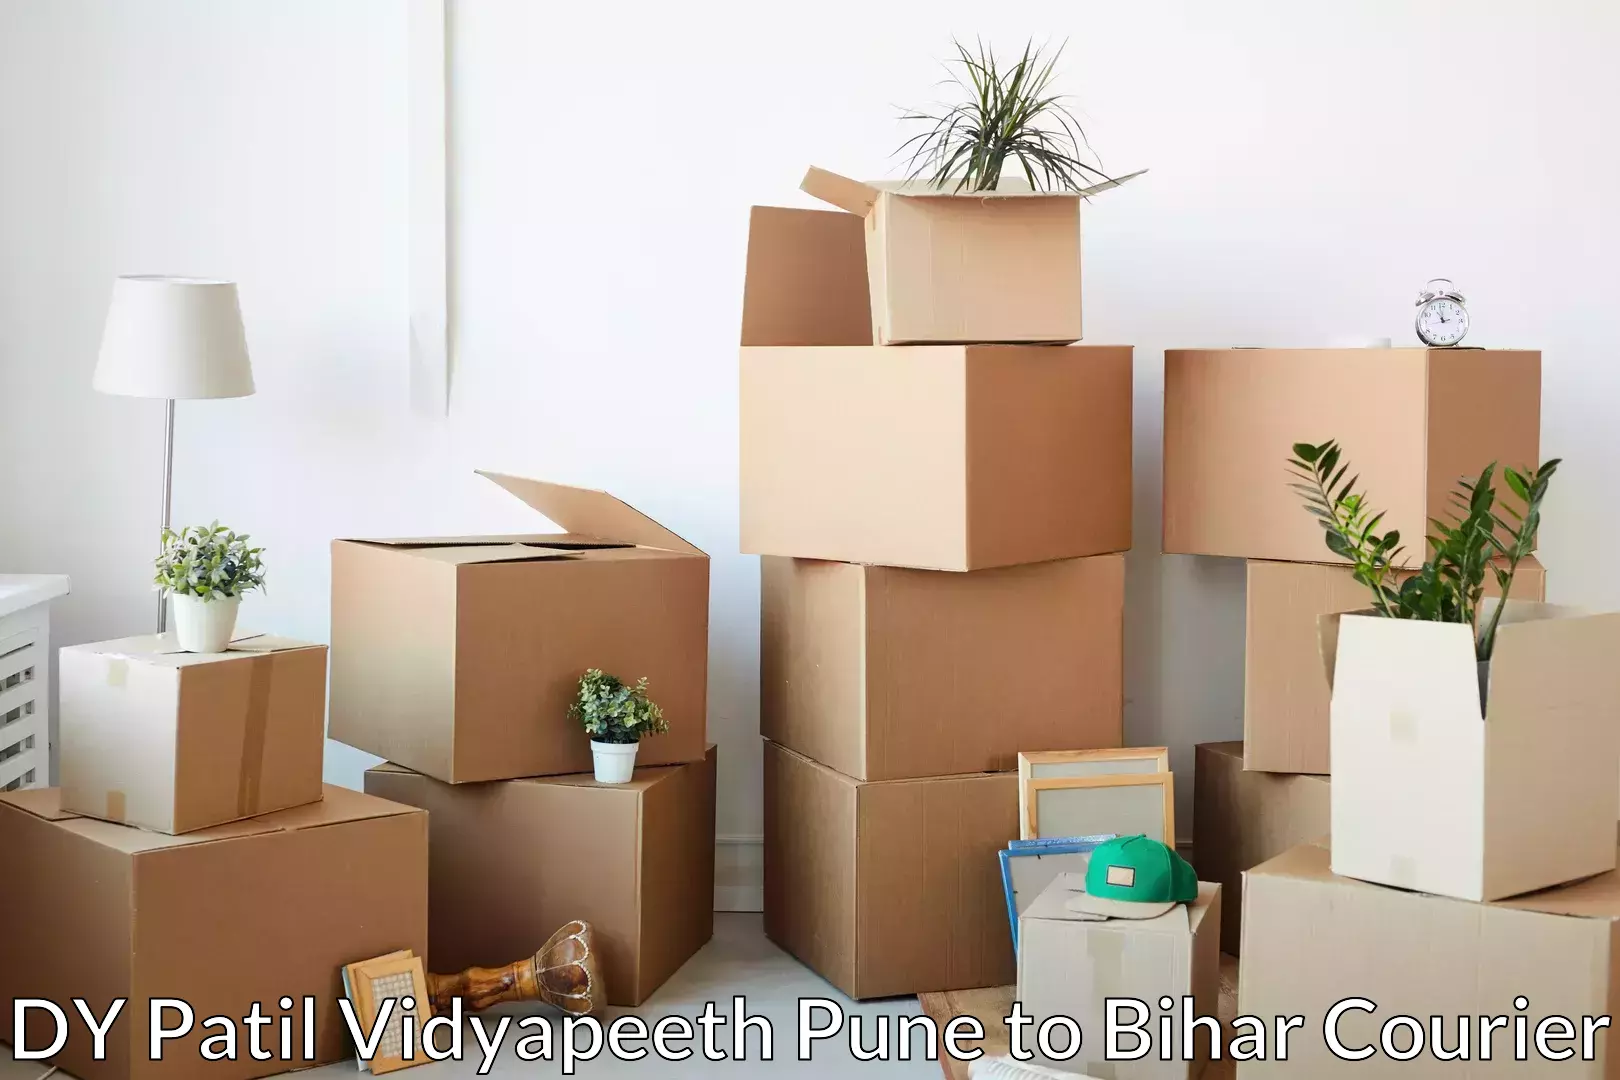 Furniture transport specialists DY Patil Vidyapeeth Pune to Samastipur